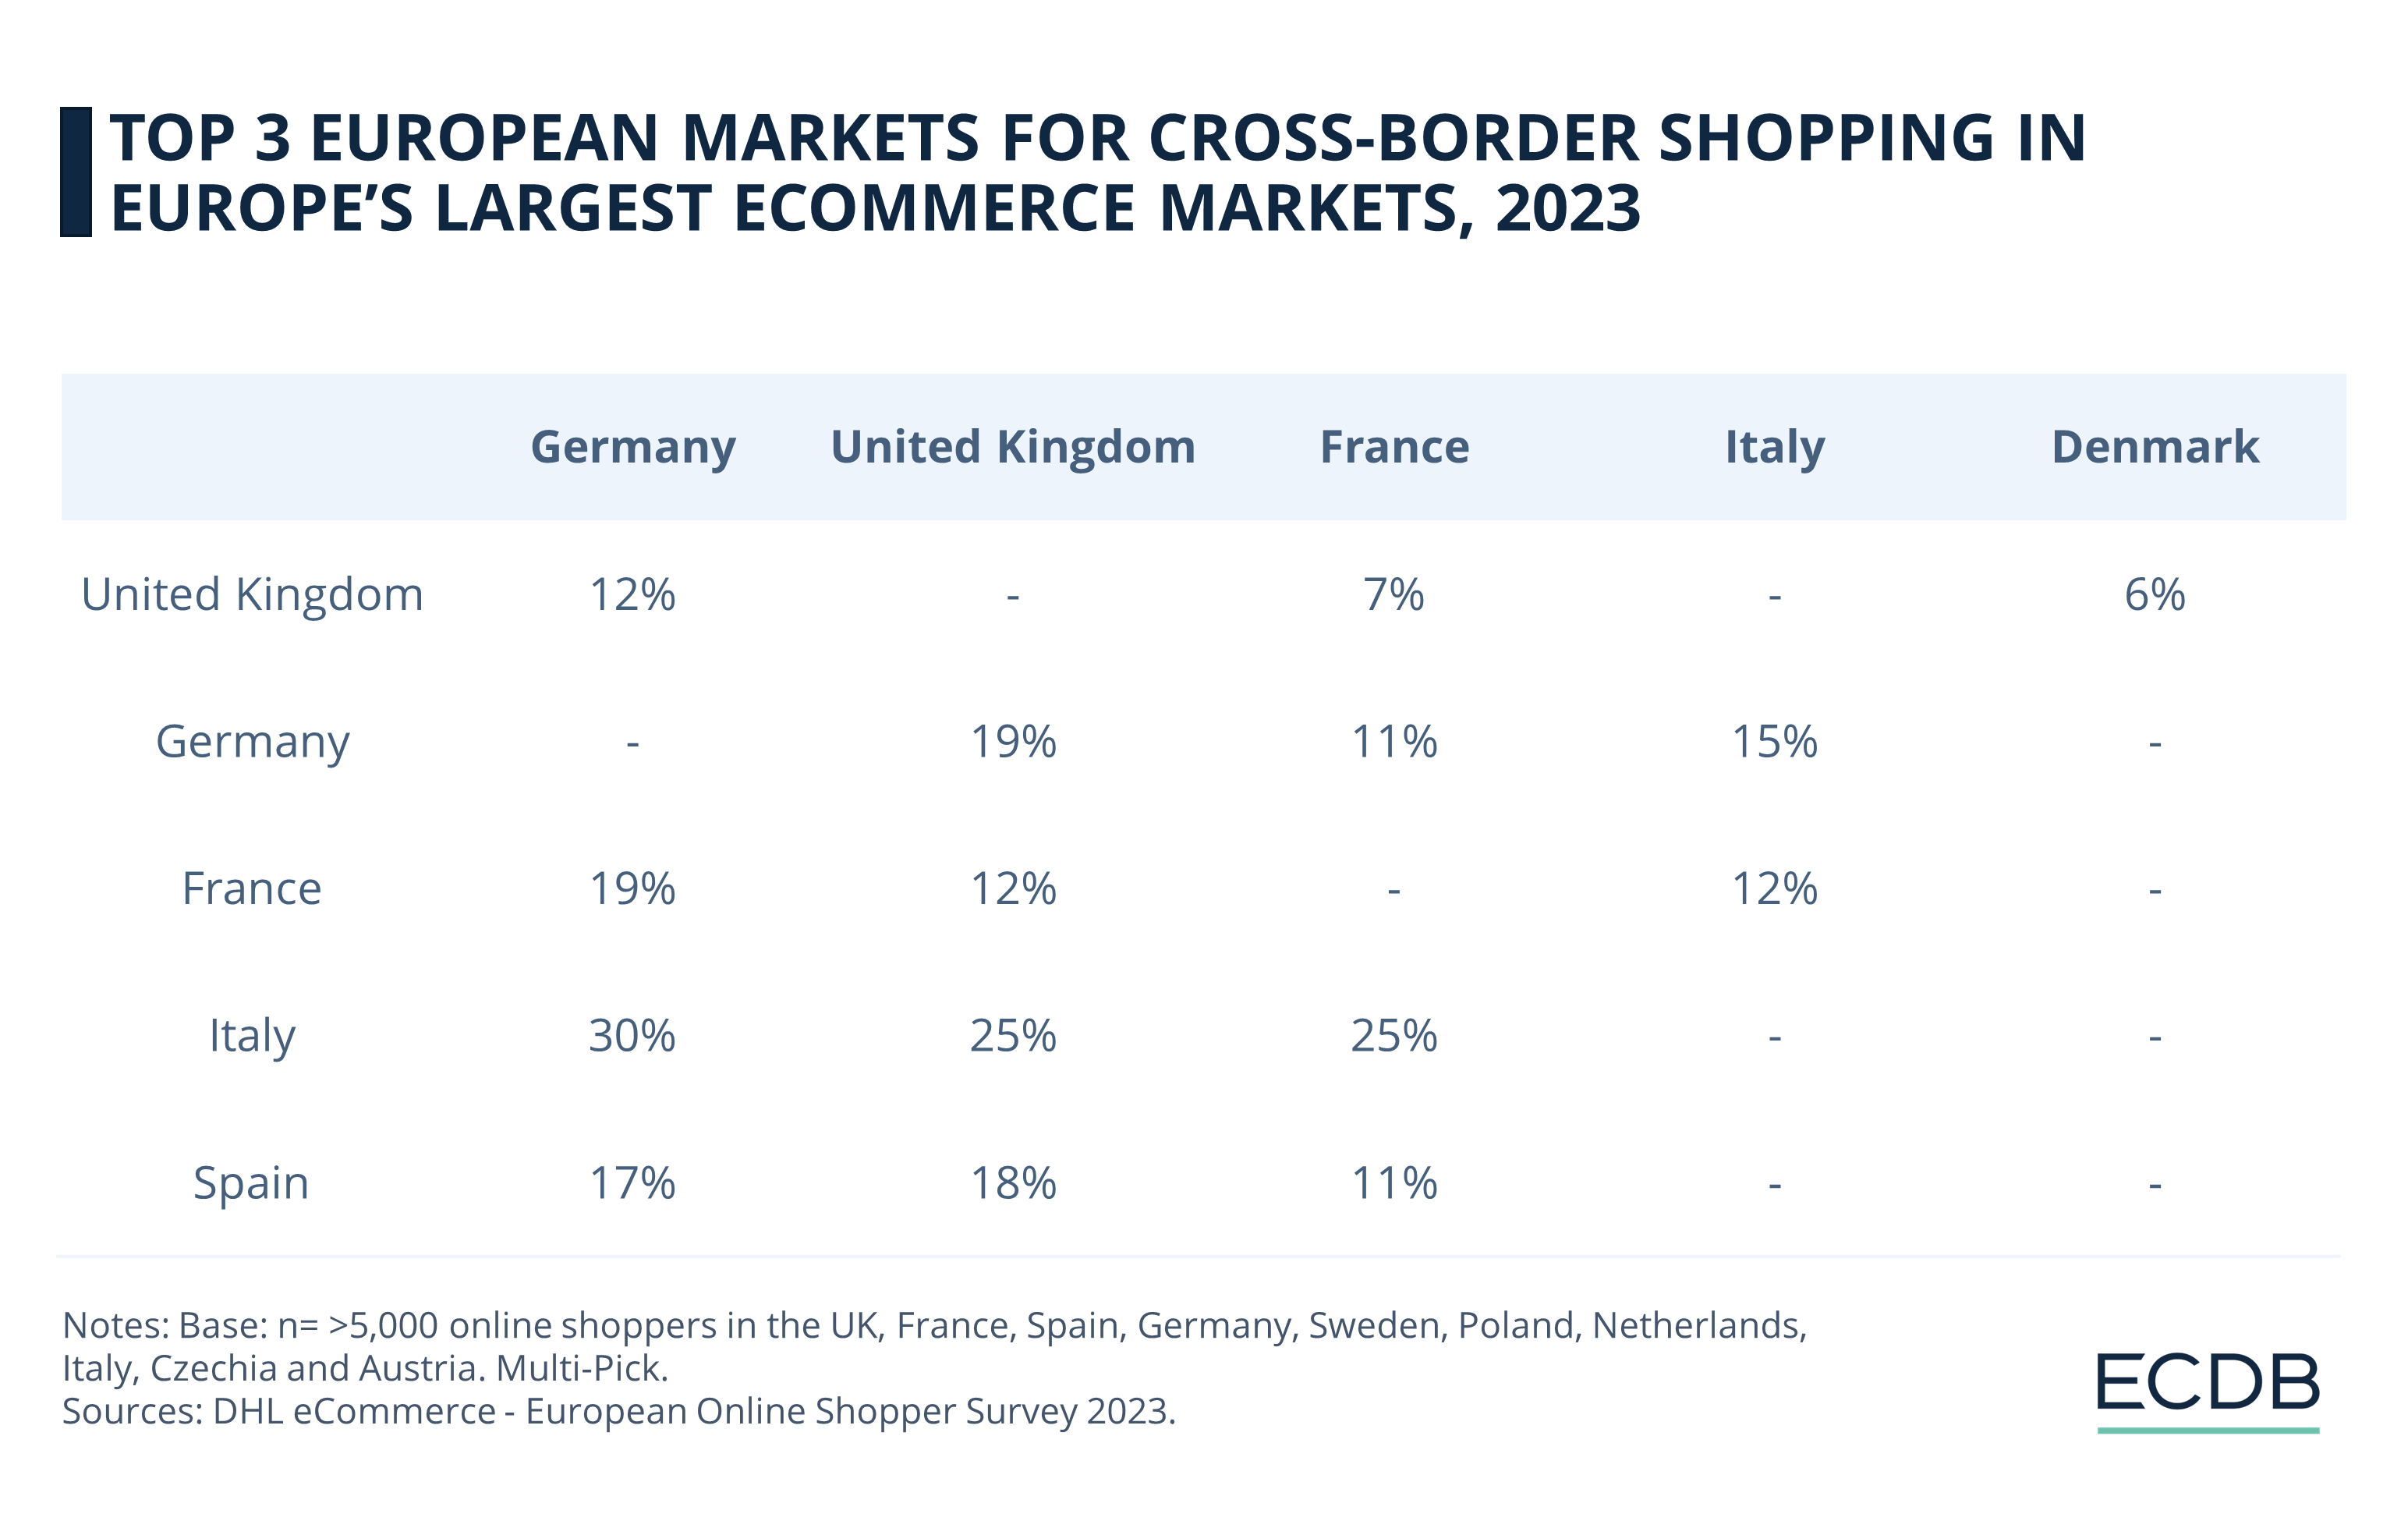 Top 3 European Markets for Cross-Border Shopping in Europe’s Largest eCommerce Markets, 2023